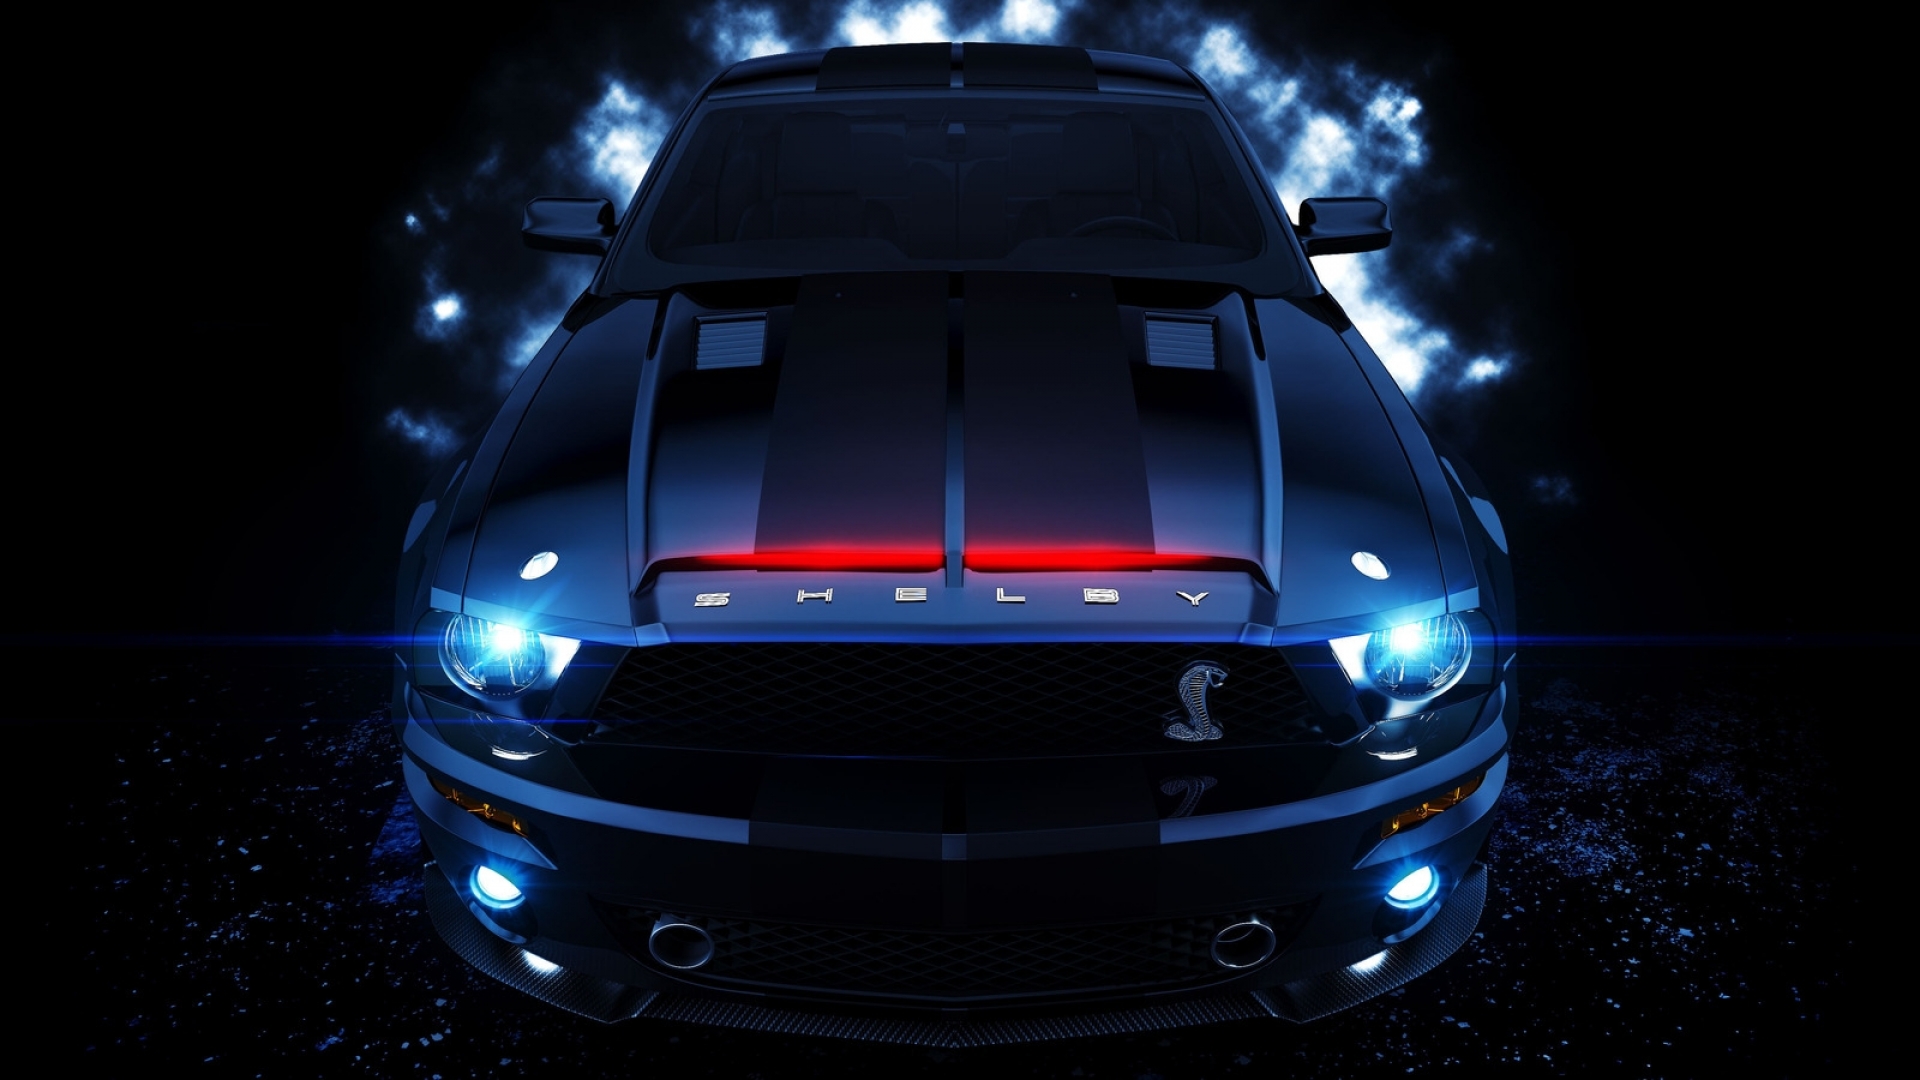 Ford Mustang Shelby Gt Muscle Cars Wallpaper